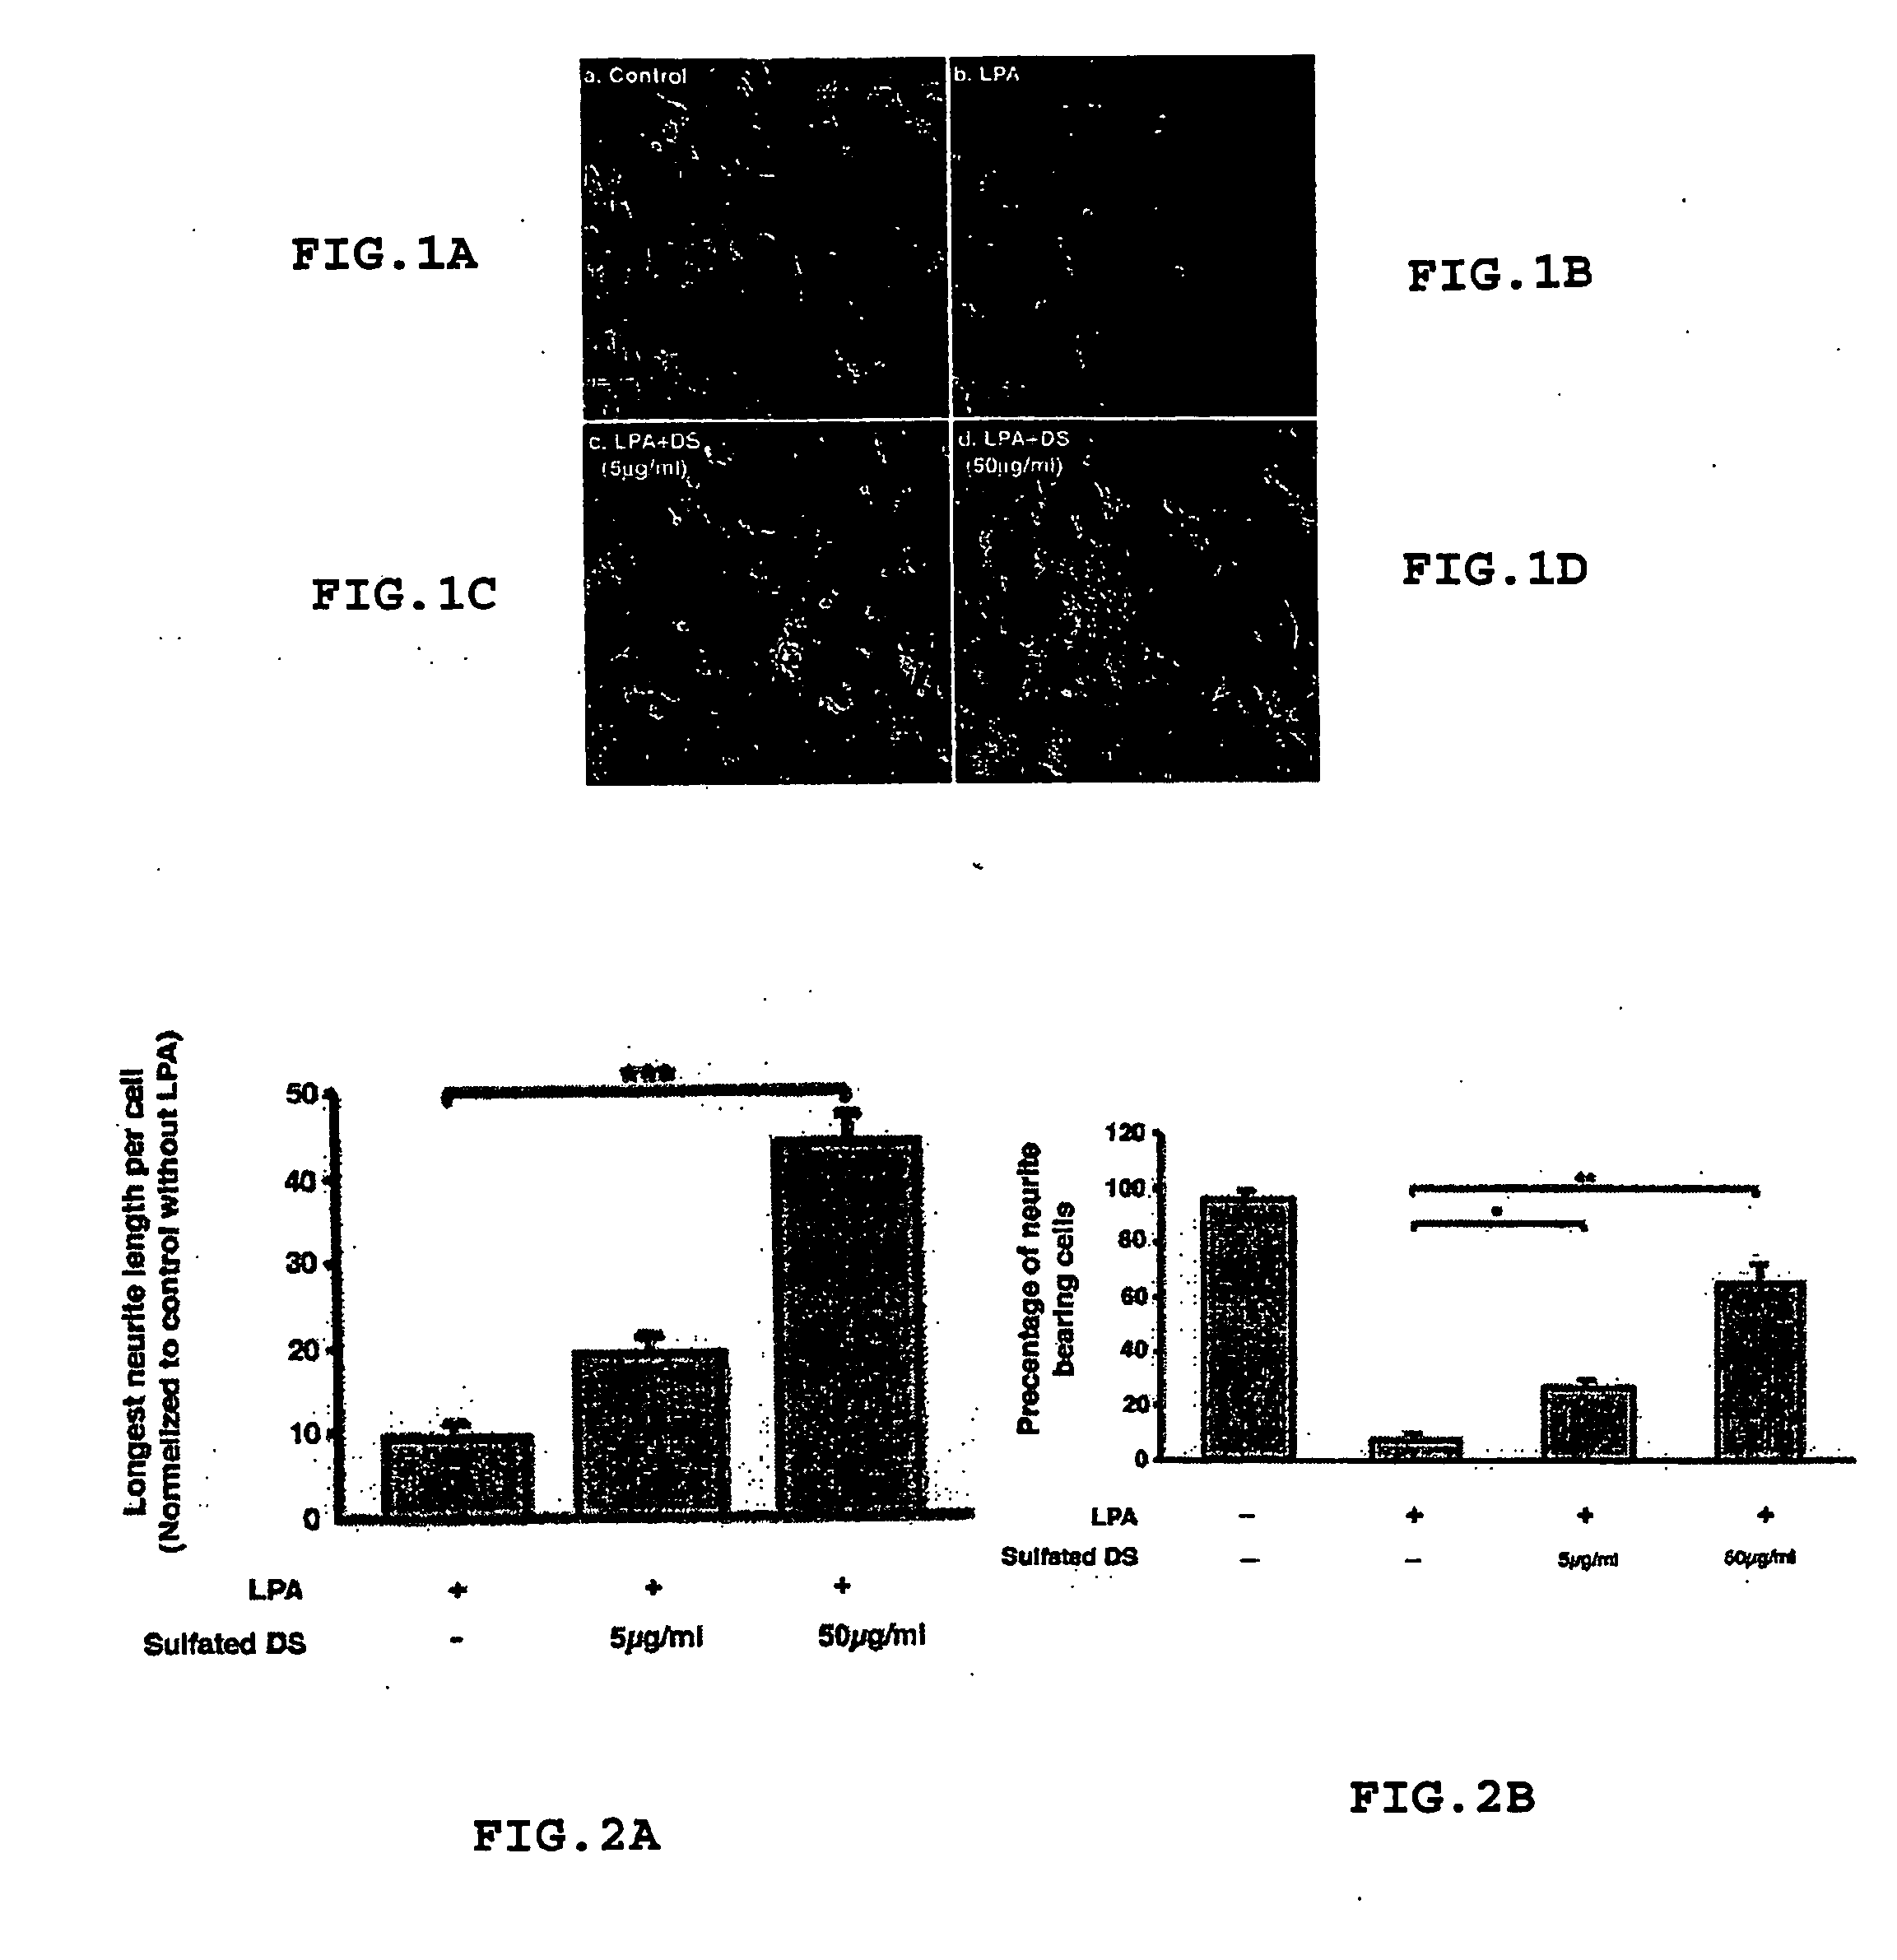 Method for Treating or Inhibiting the Effects of Injuries or Diseases that Result in Neuronal Degeneration